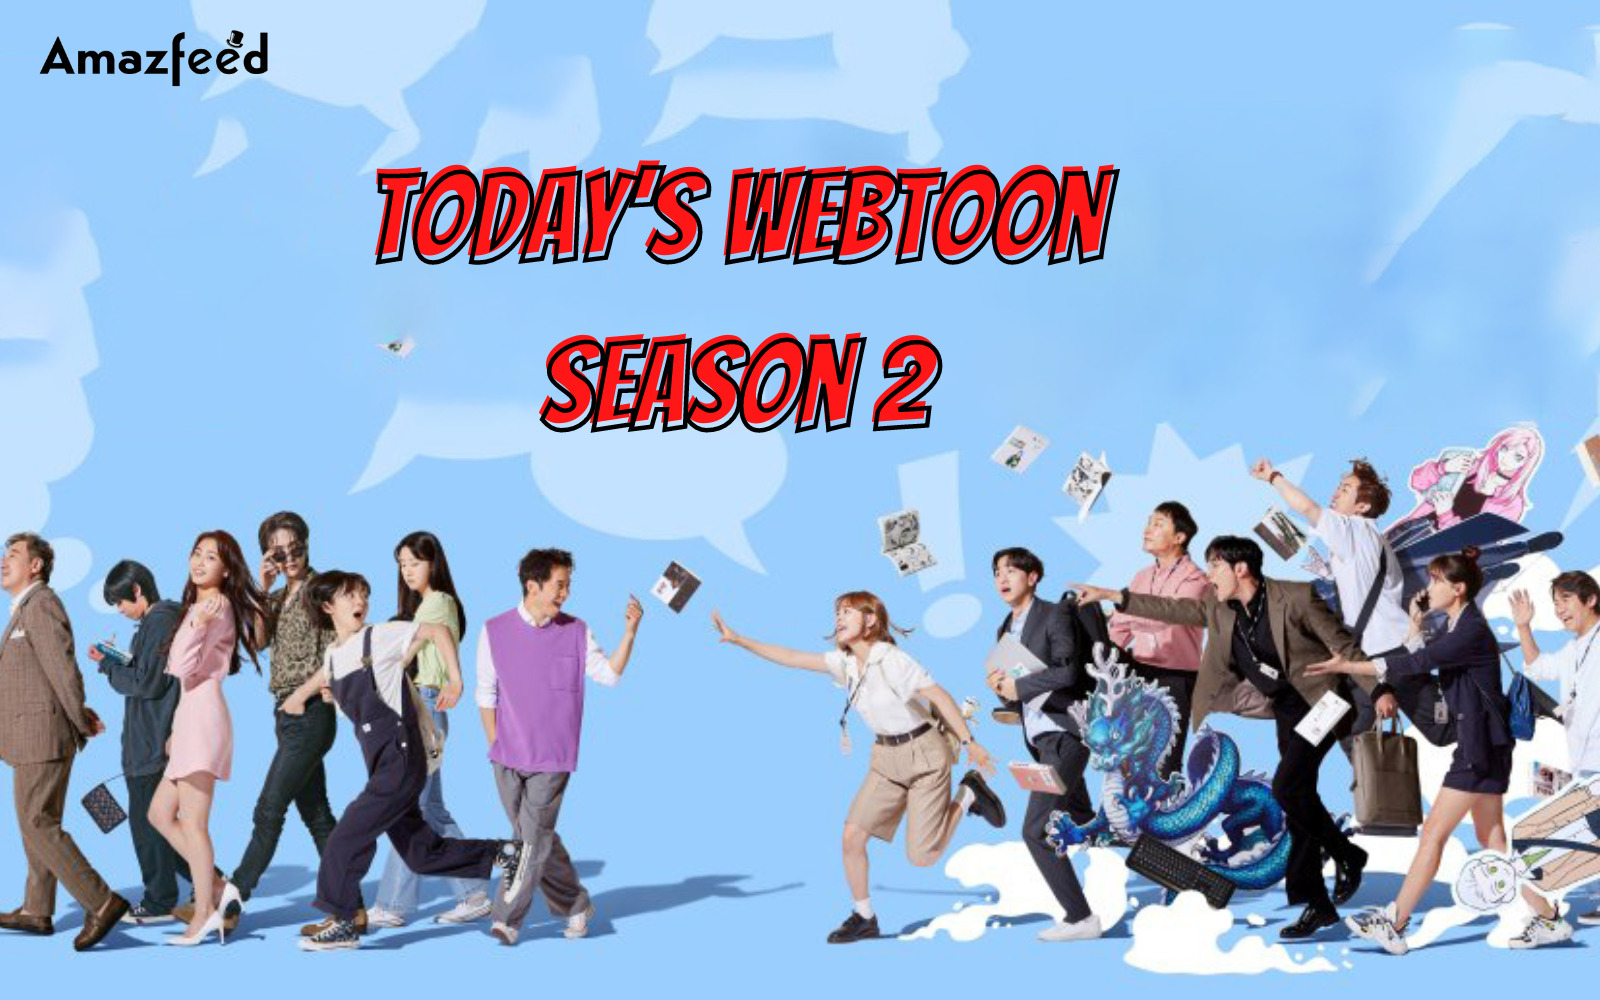 What We Can Expect From Today’s webtoon Season 2